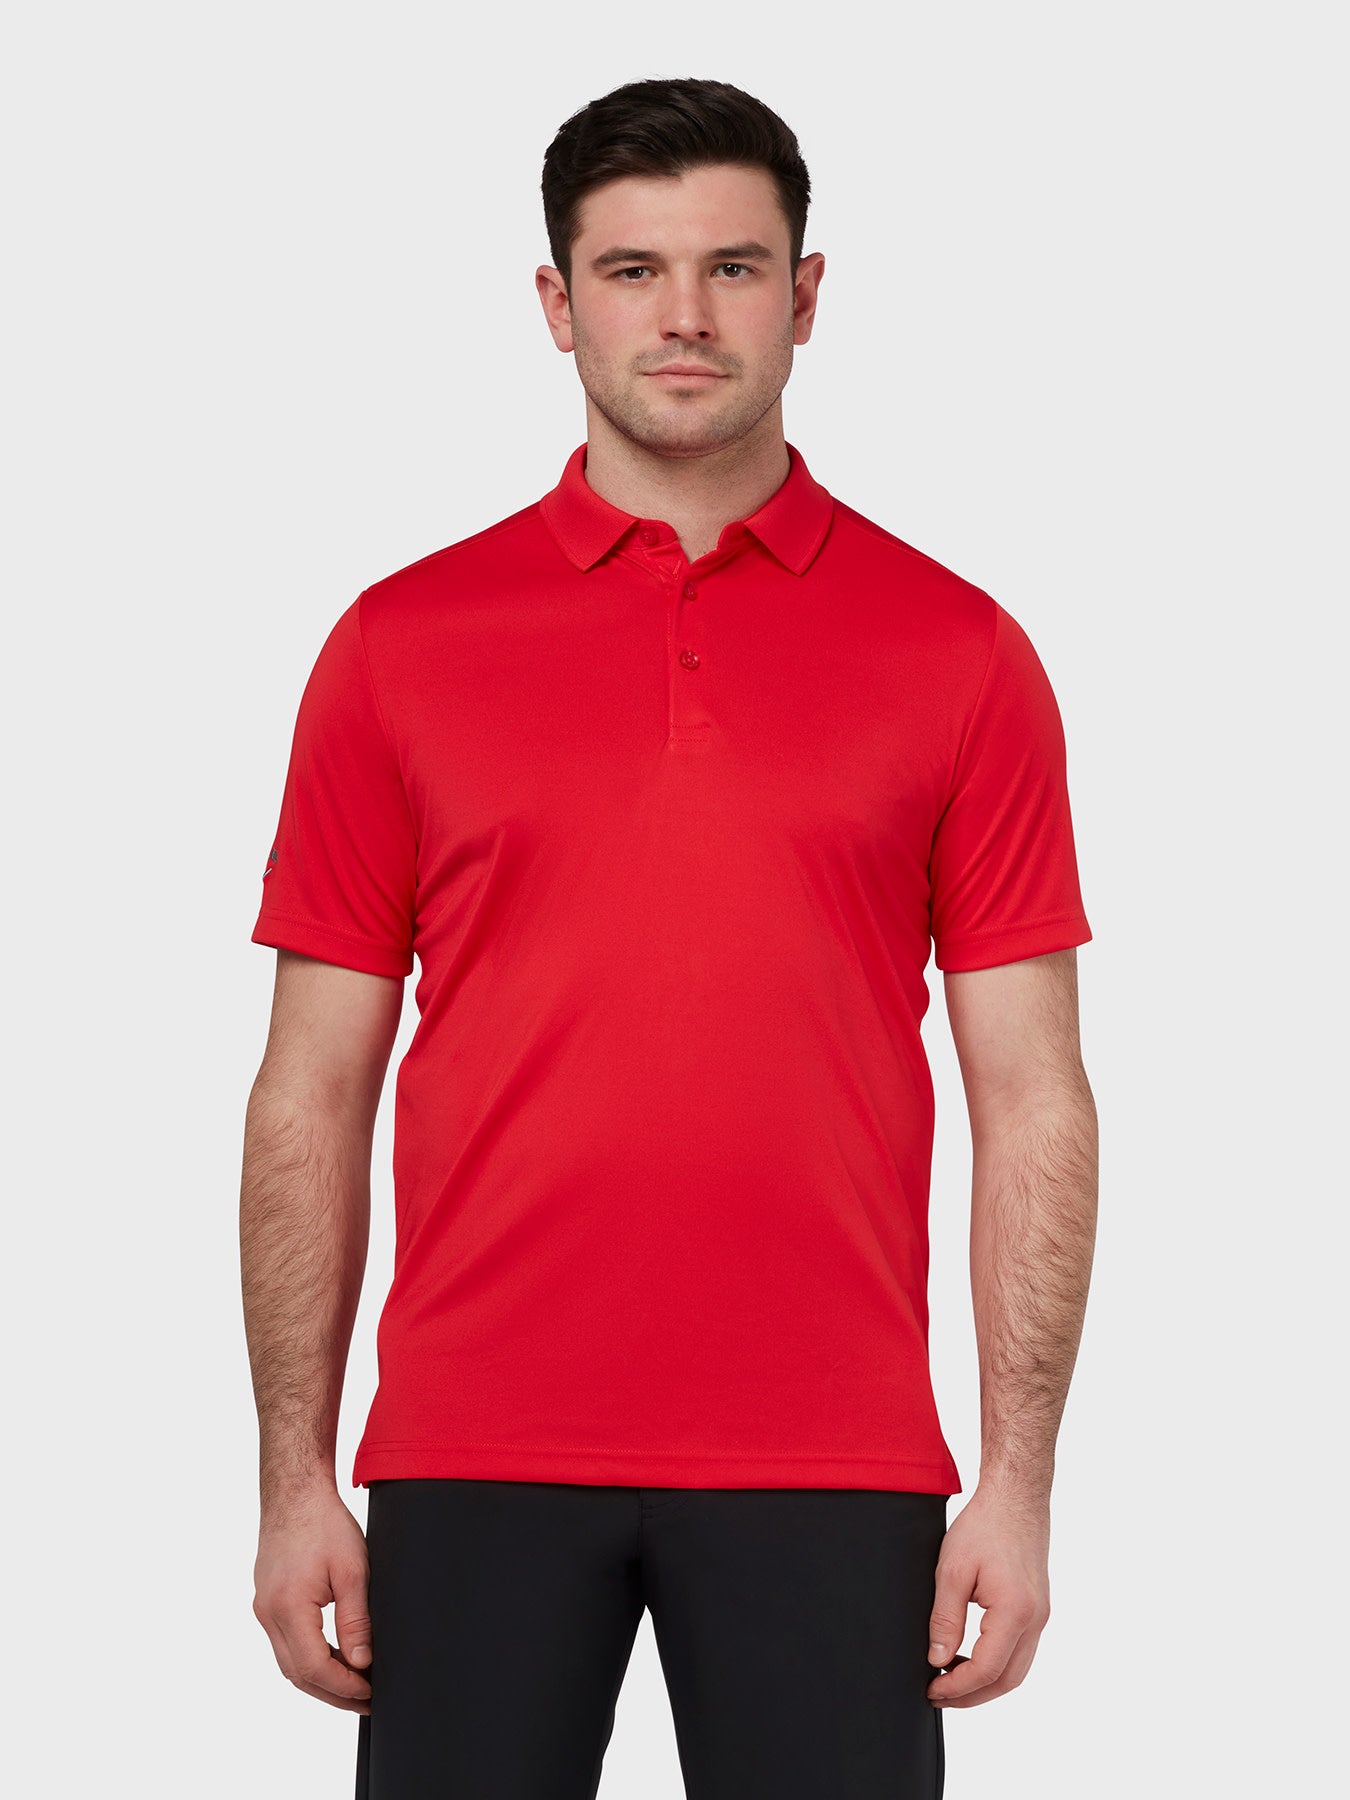 View Tournament Polo In True Red True Red L information